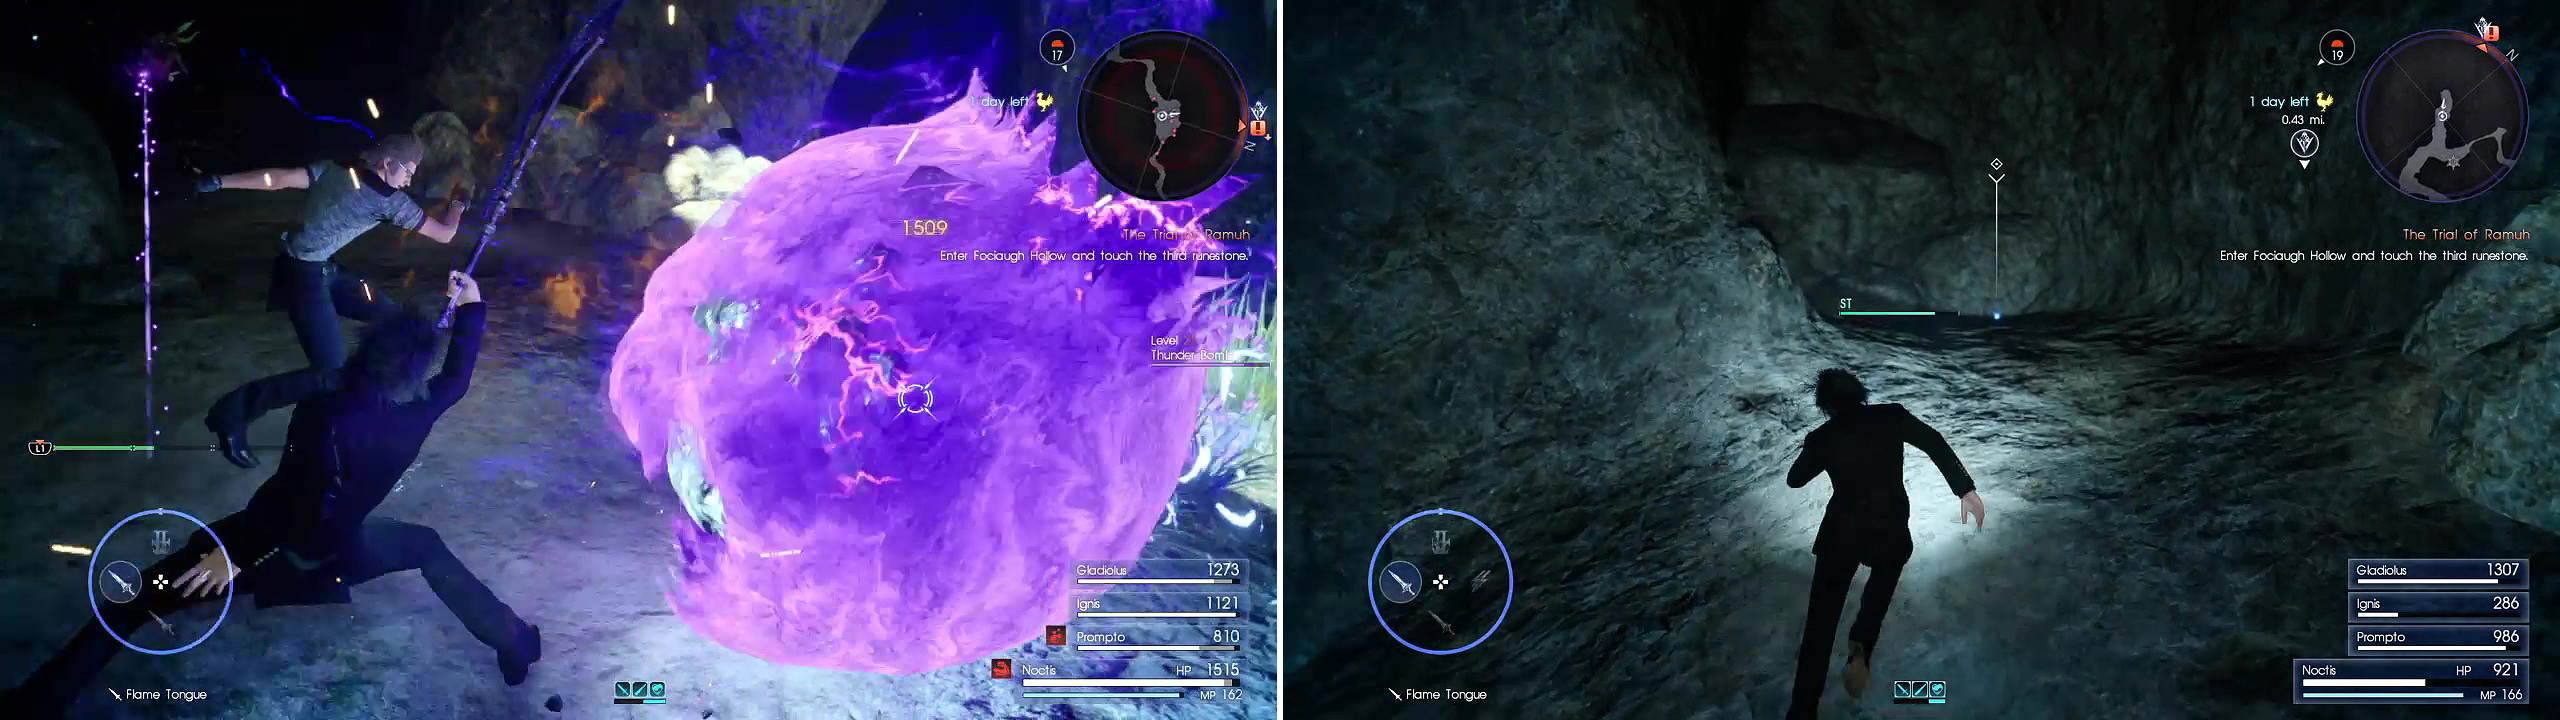 Thunder Bombs can be very powerful in large groups (left). When you reach the ice deposit, cut up the dead end (right) to find another Magic Flask.